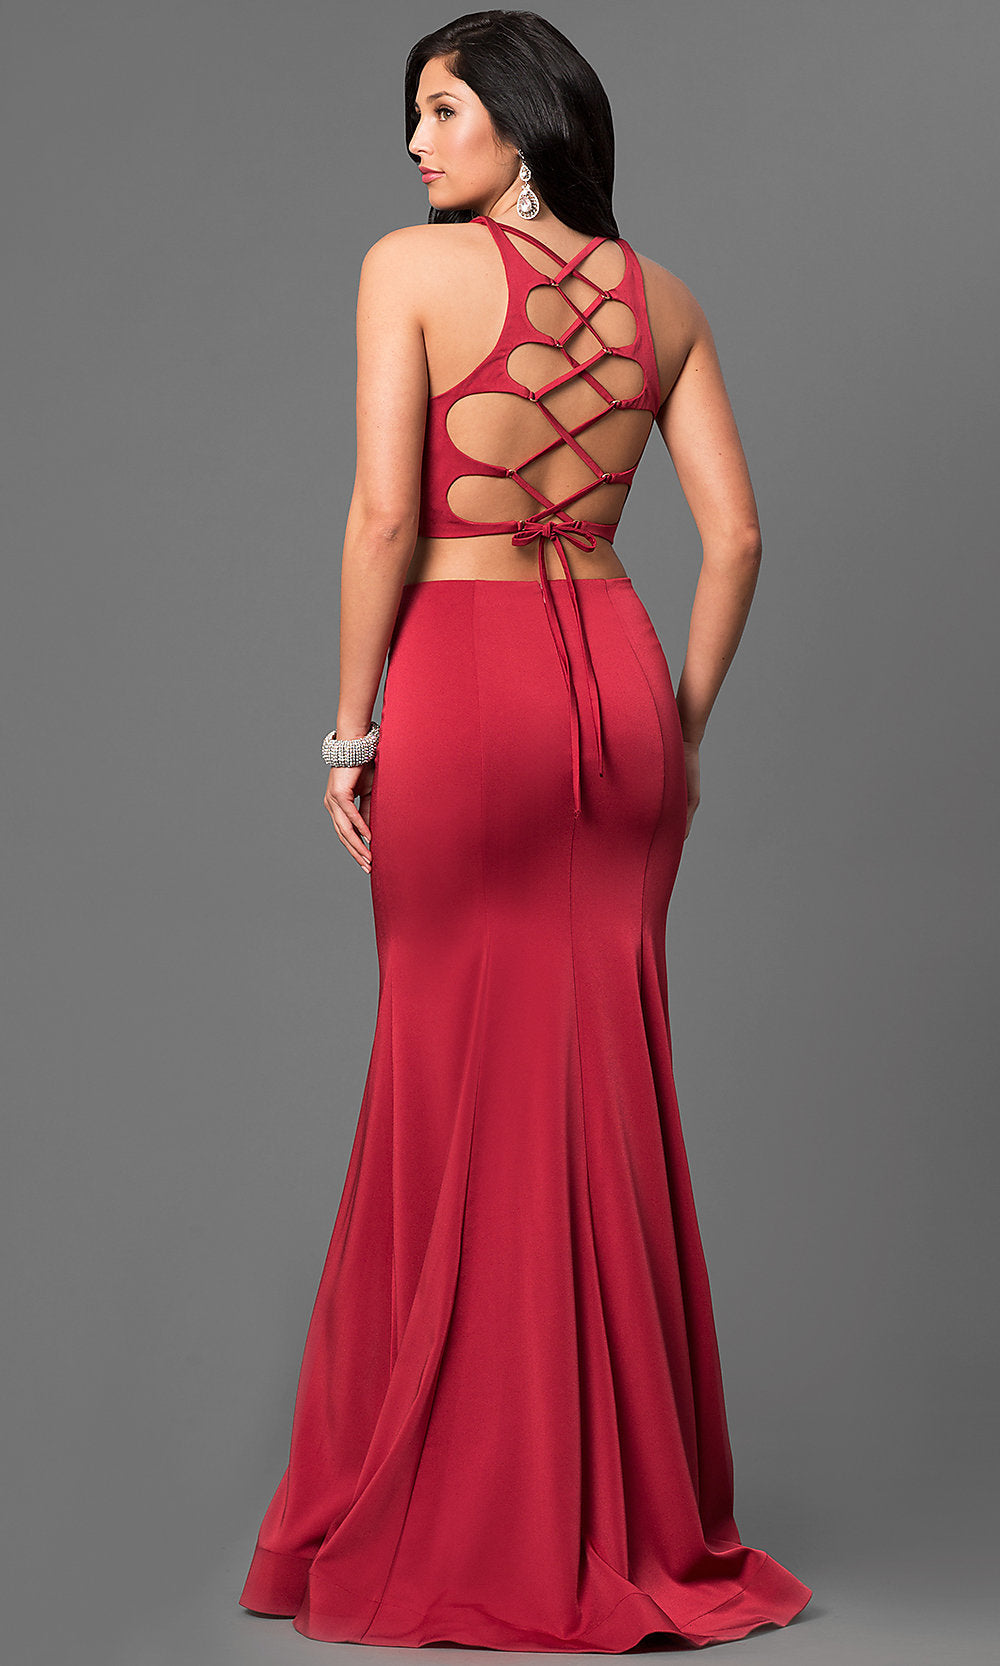  Two Piece La Femme Prom Dress with an Open Back